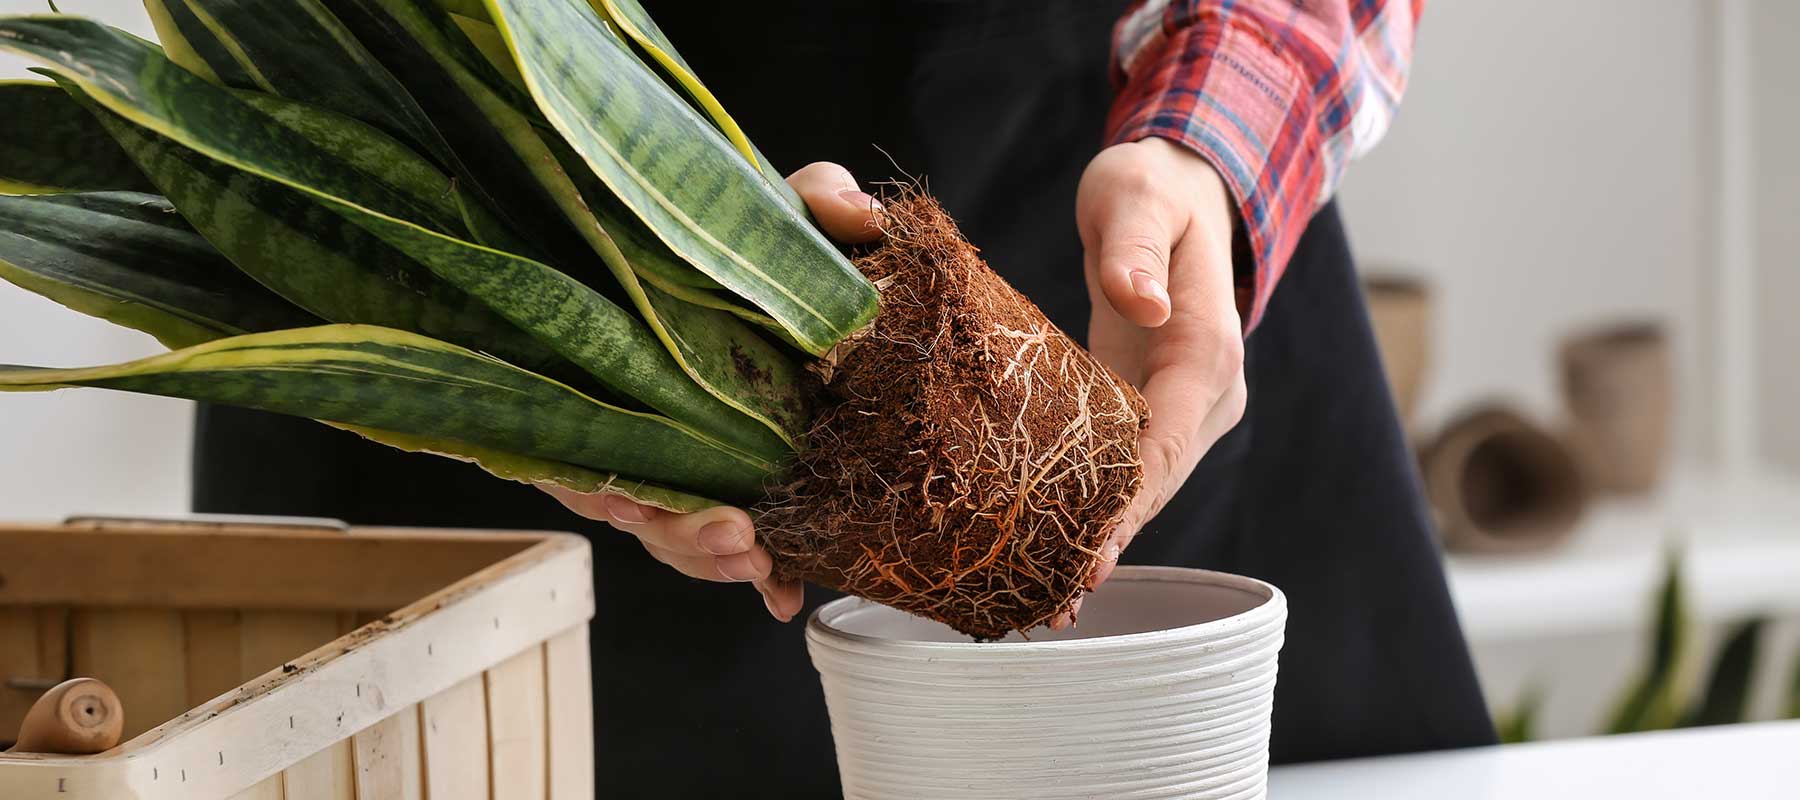 Understanding the Need for Repotting: Why do snake plants need to be repotted